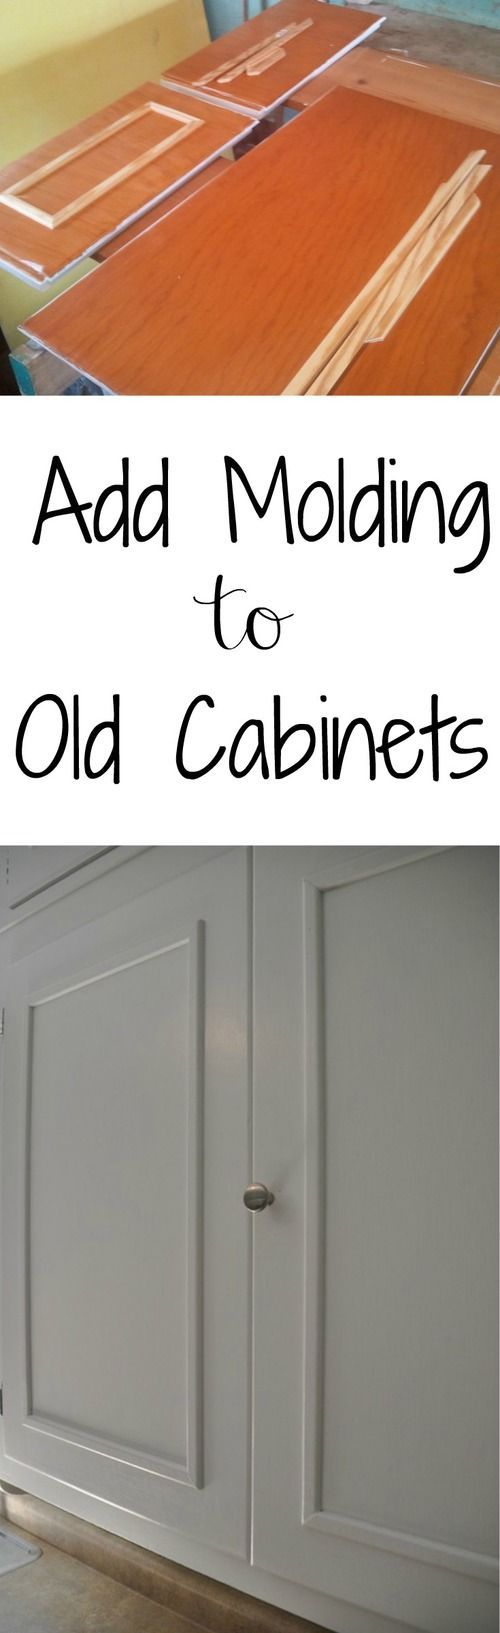 How to Add Cabinet Molding.  Great solution for those old cabinets!